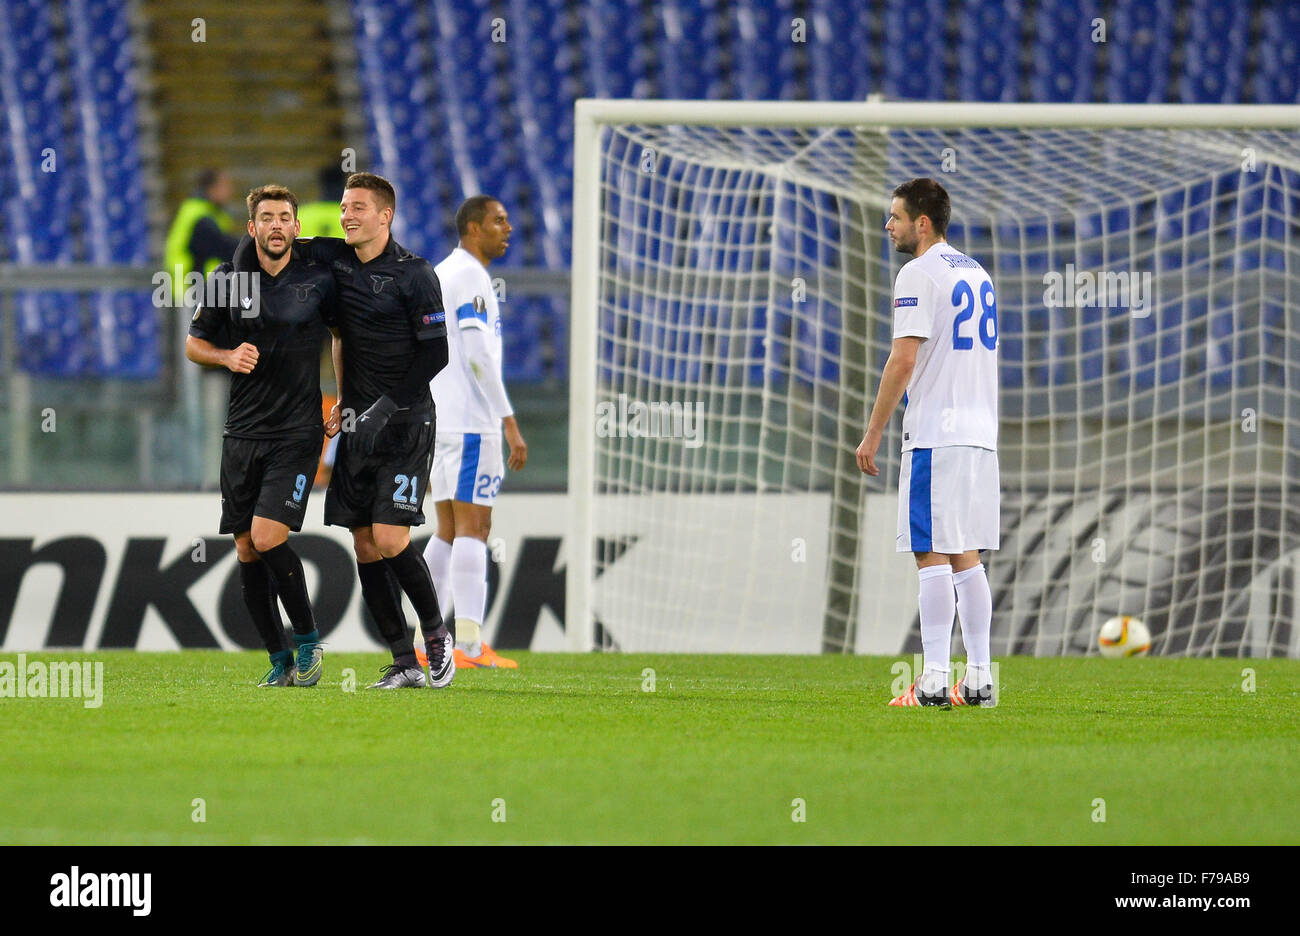 Rome, Italy. 26th November, 2015. Filip Djordjevic celebrates after scoring a goal 3-1 during the Europe League football match S.S. Lazio vs F.C. Dnipro at the Olympic Stadium in Rome, on november 26, 2015 Credit:  Silvia Lore'/Alamy Live News Stock Photo